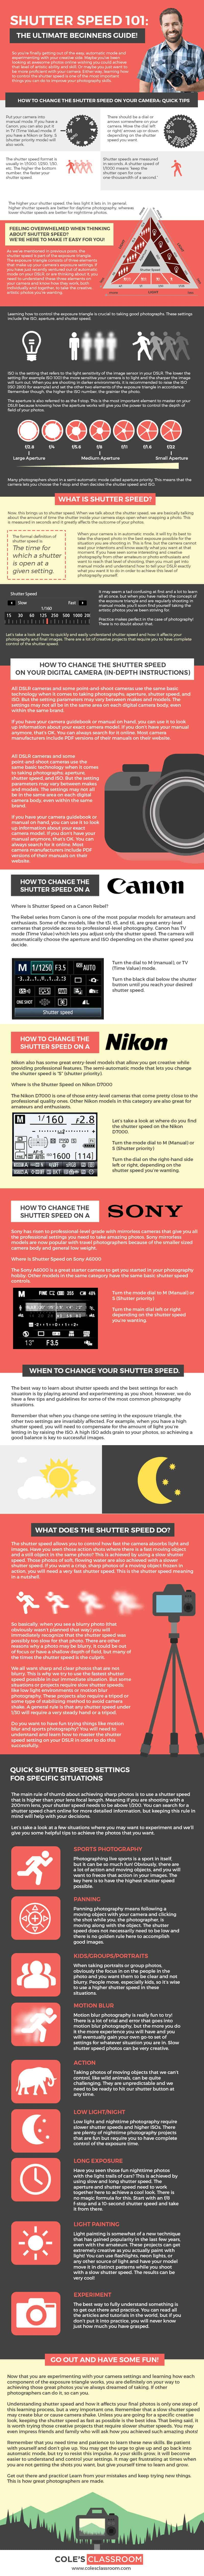 How to change your shutter speed